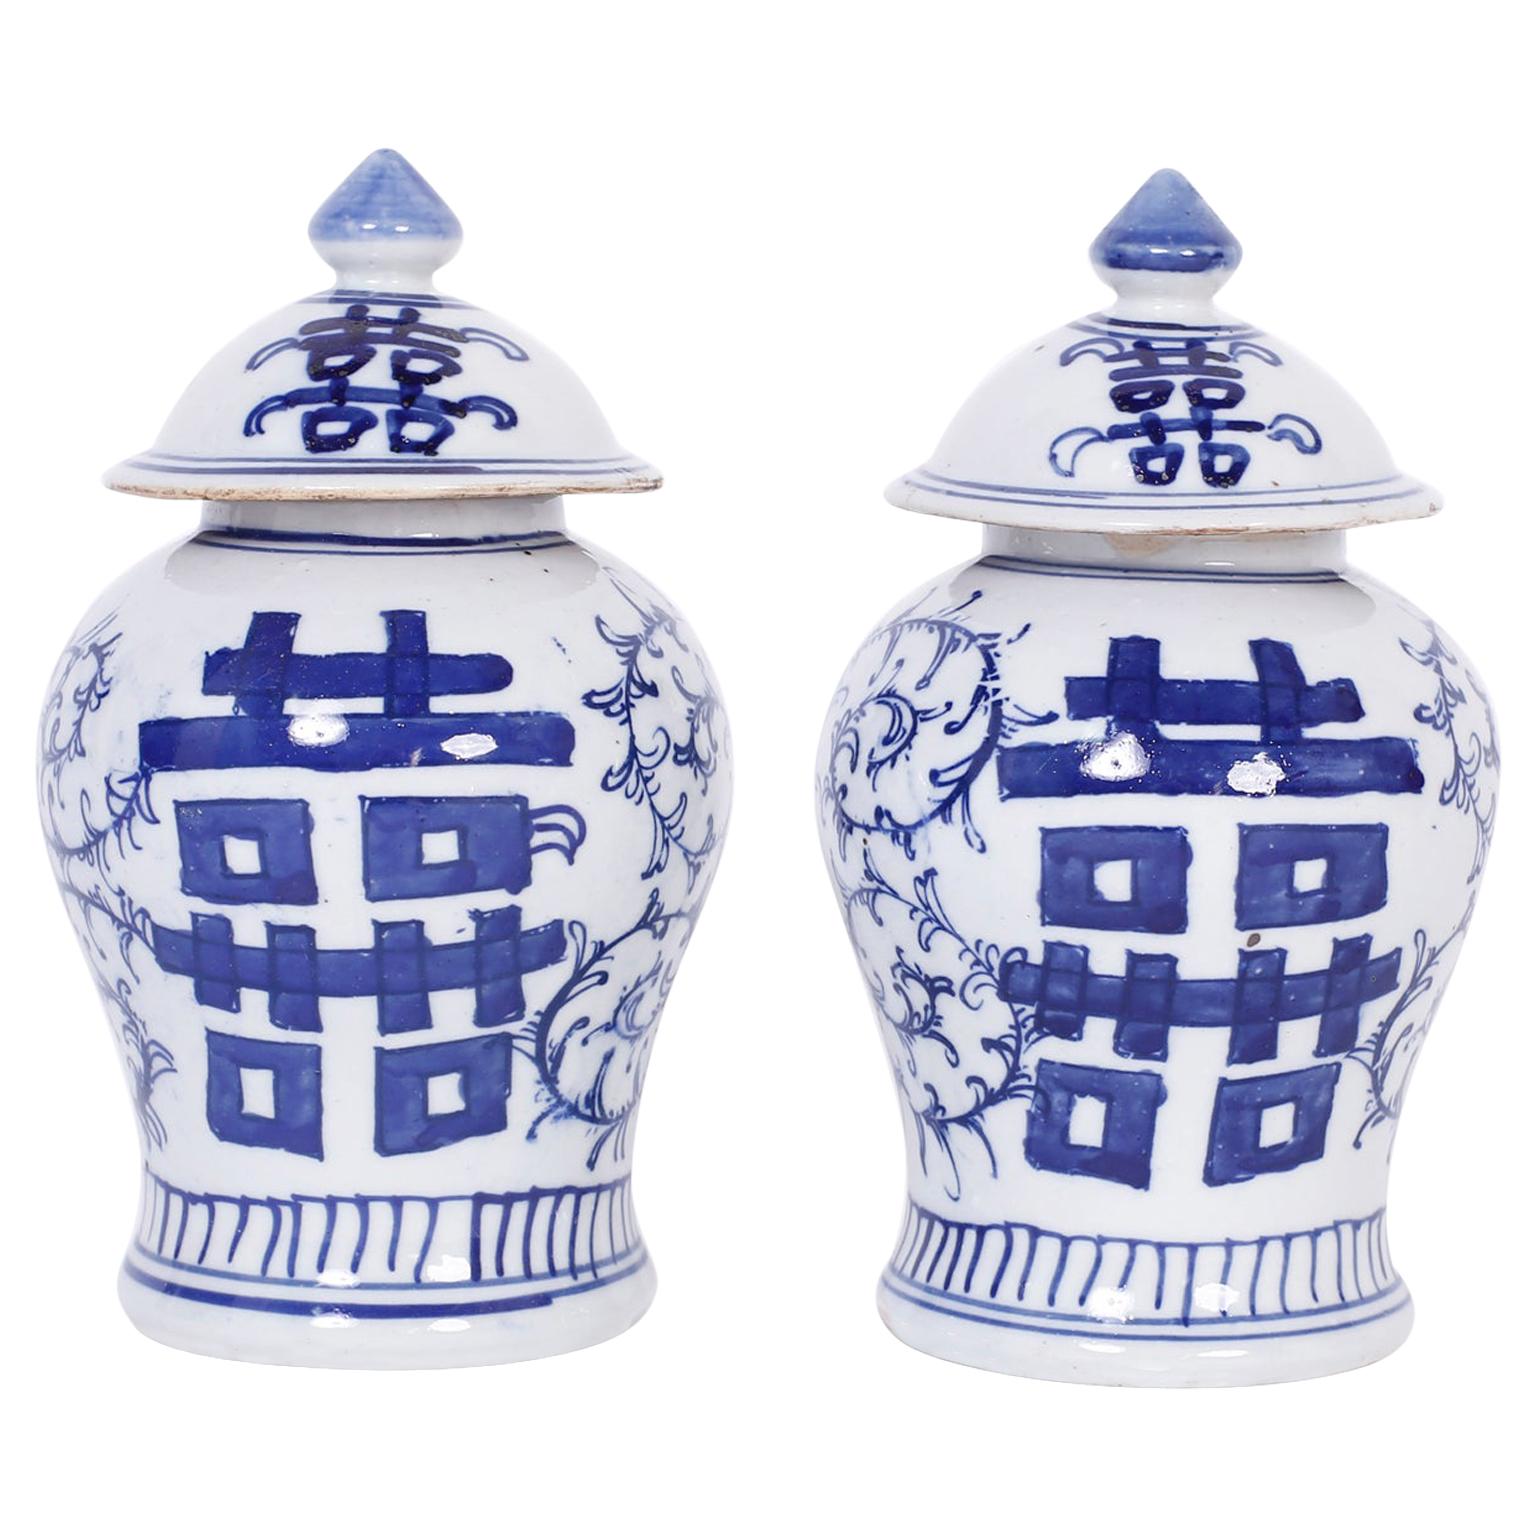 Pair of Blue and White Porcelain Double Happiness Jars